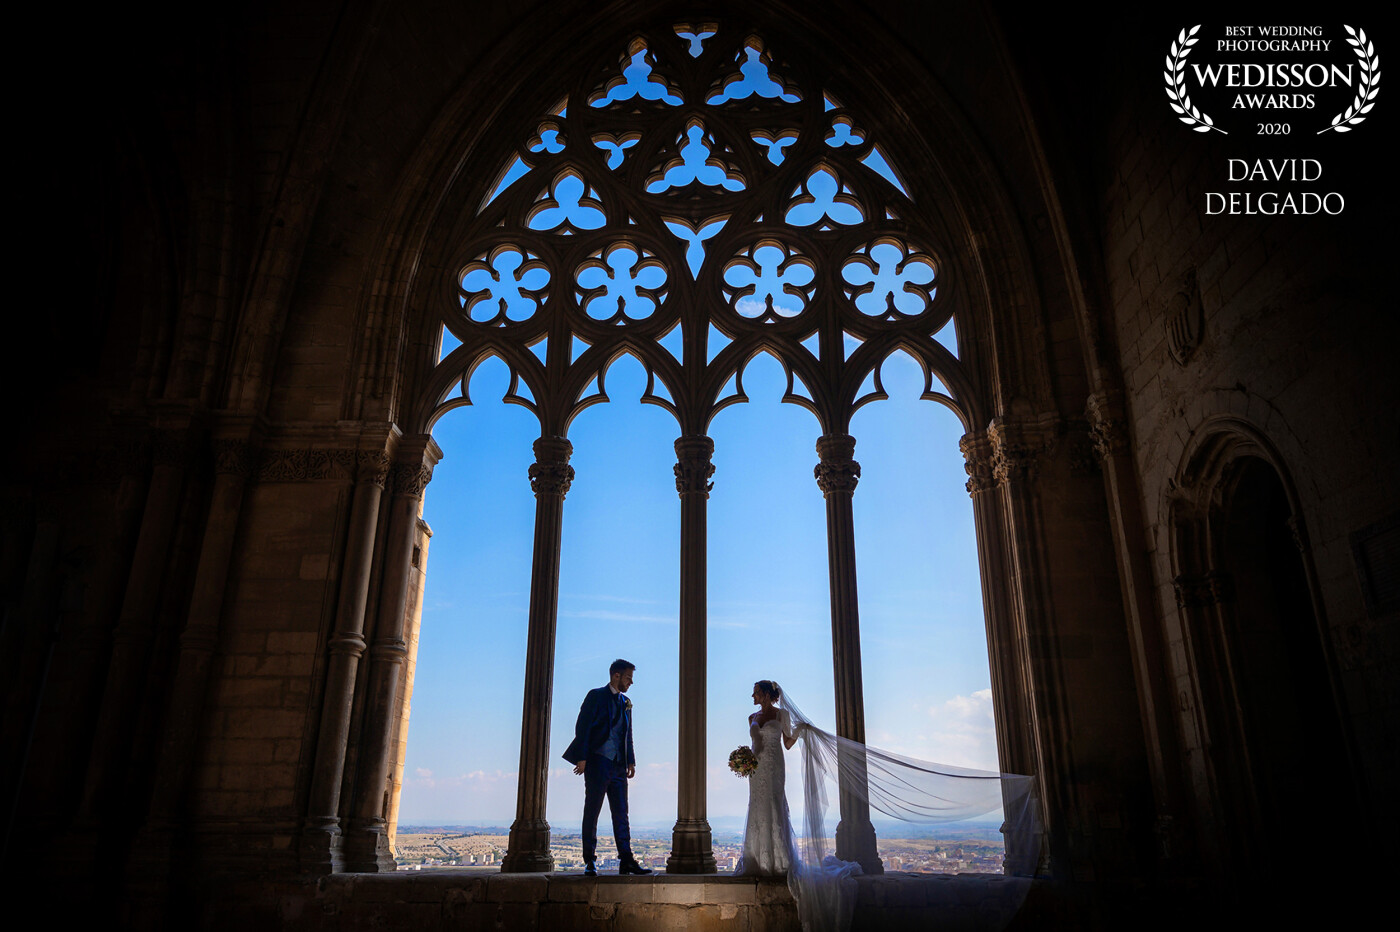 Beautiful Souls - They are Patricia and Albert, La Seu Vella is the Lleida's castle, the emblem of the city, it was a beautiful place to do the photo session on their wonderful wedding day.